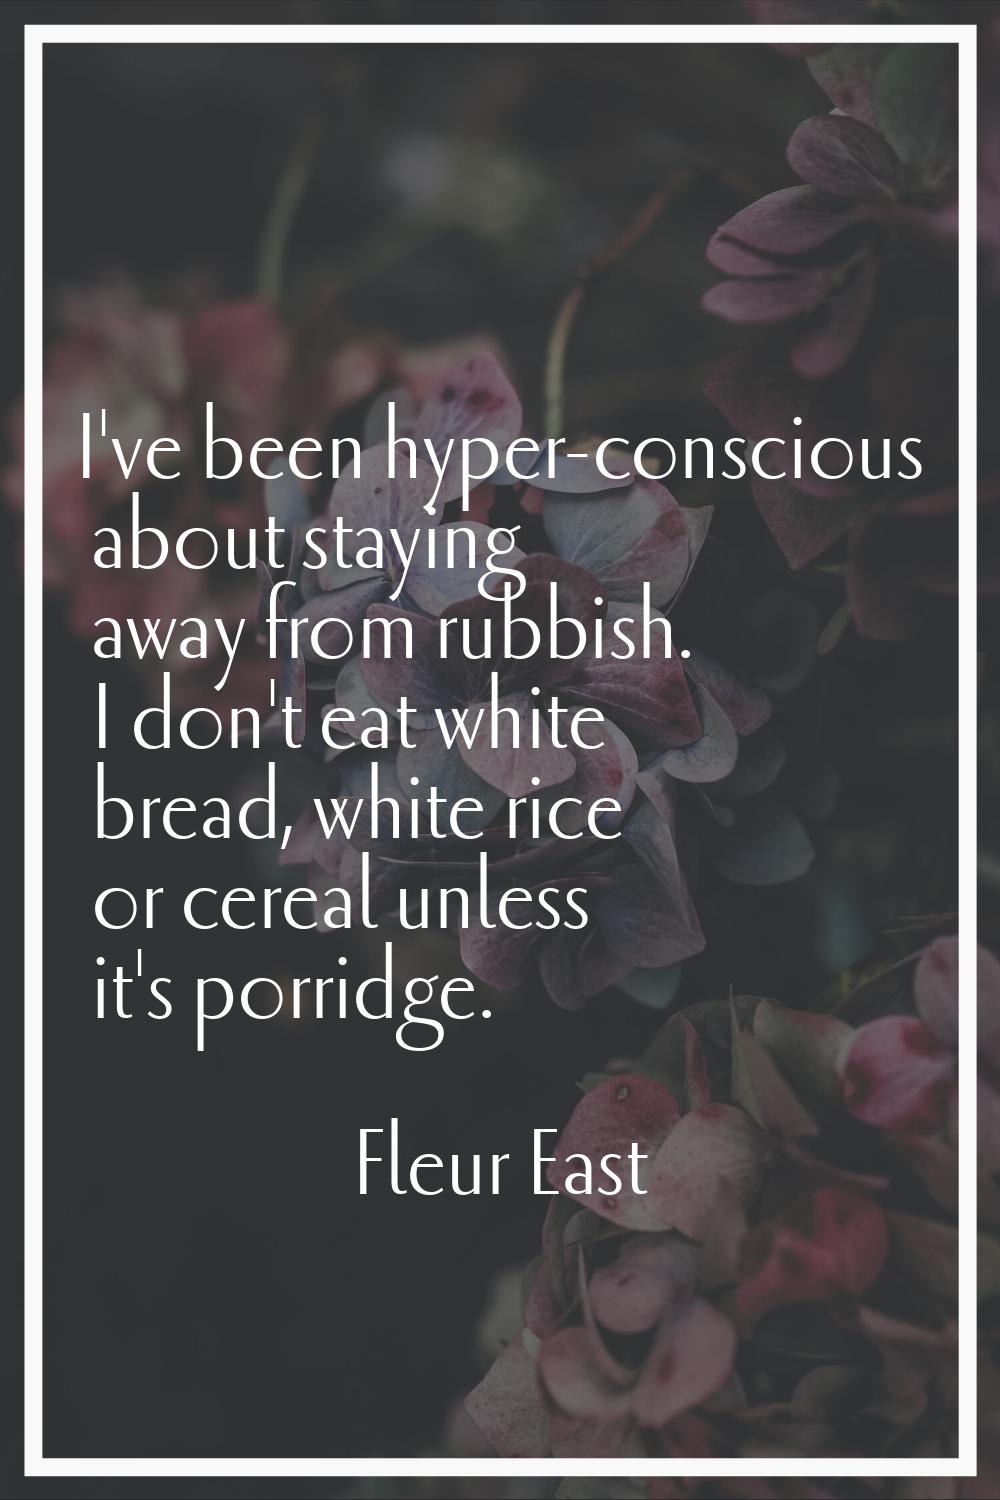 I've been hyper-conscious about staying away from rubbish. I don't eat white bread, white rice or c